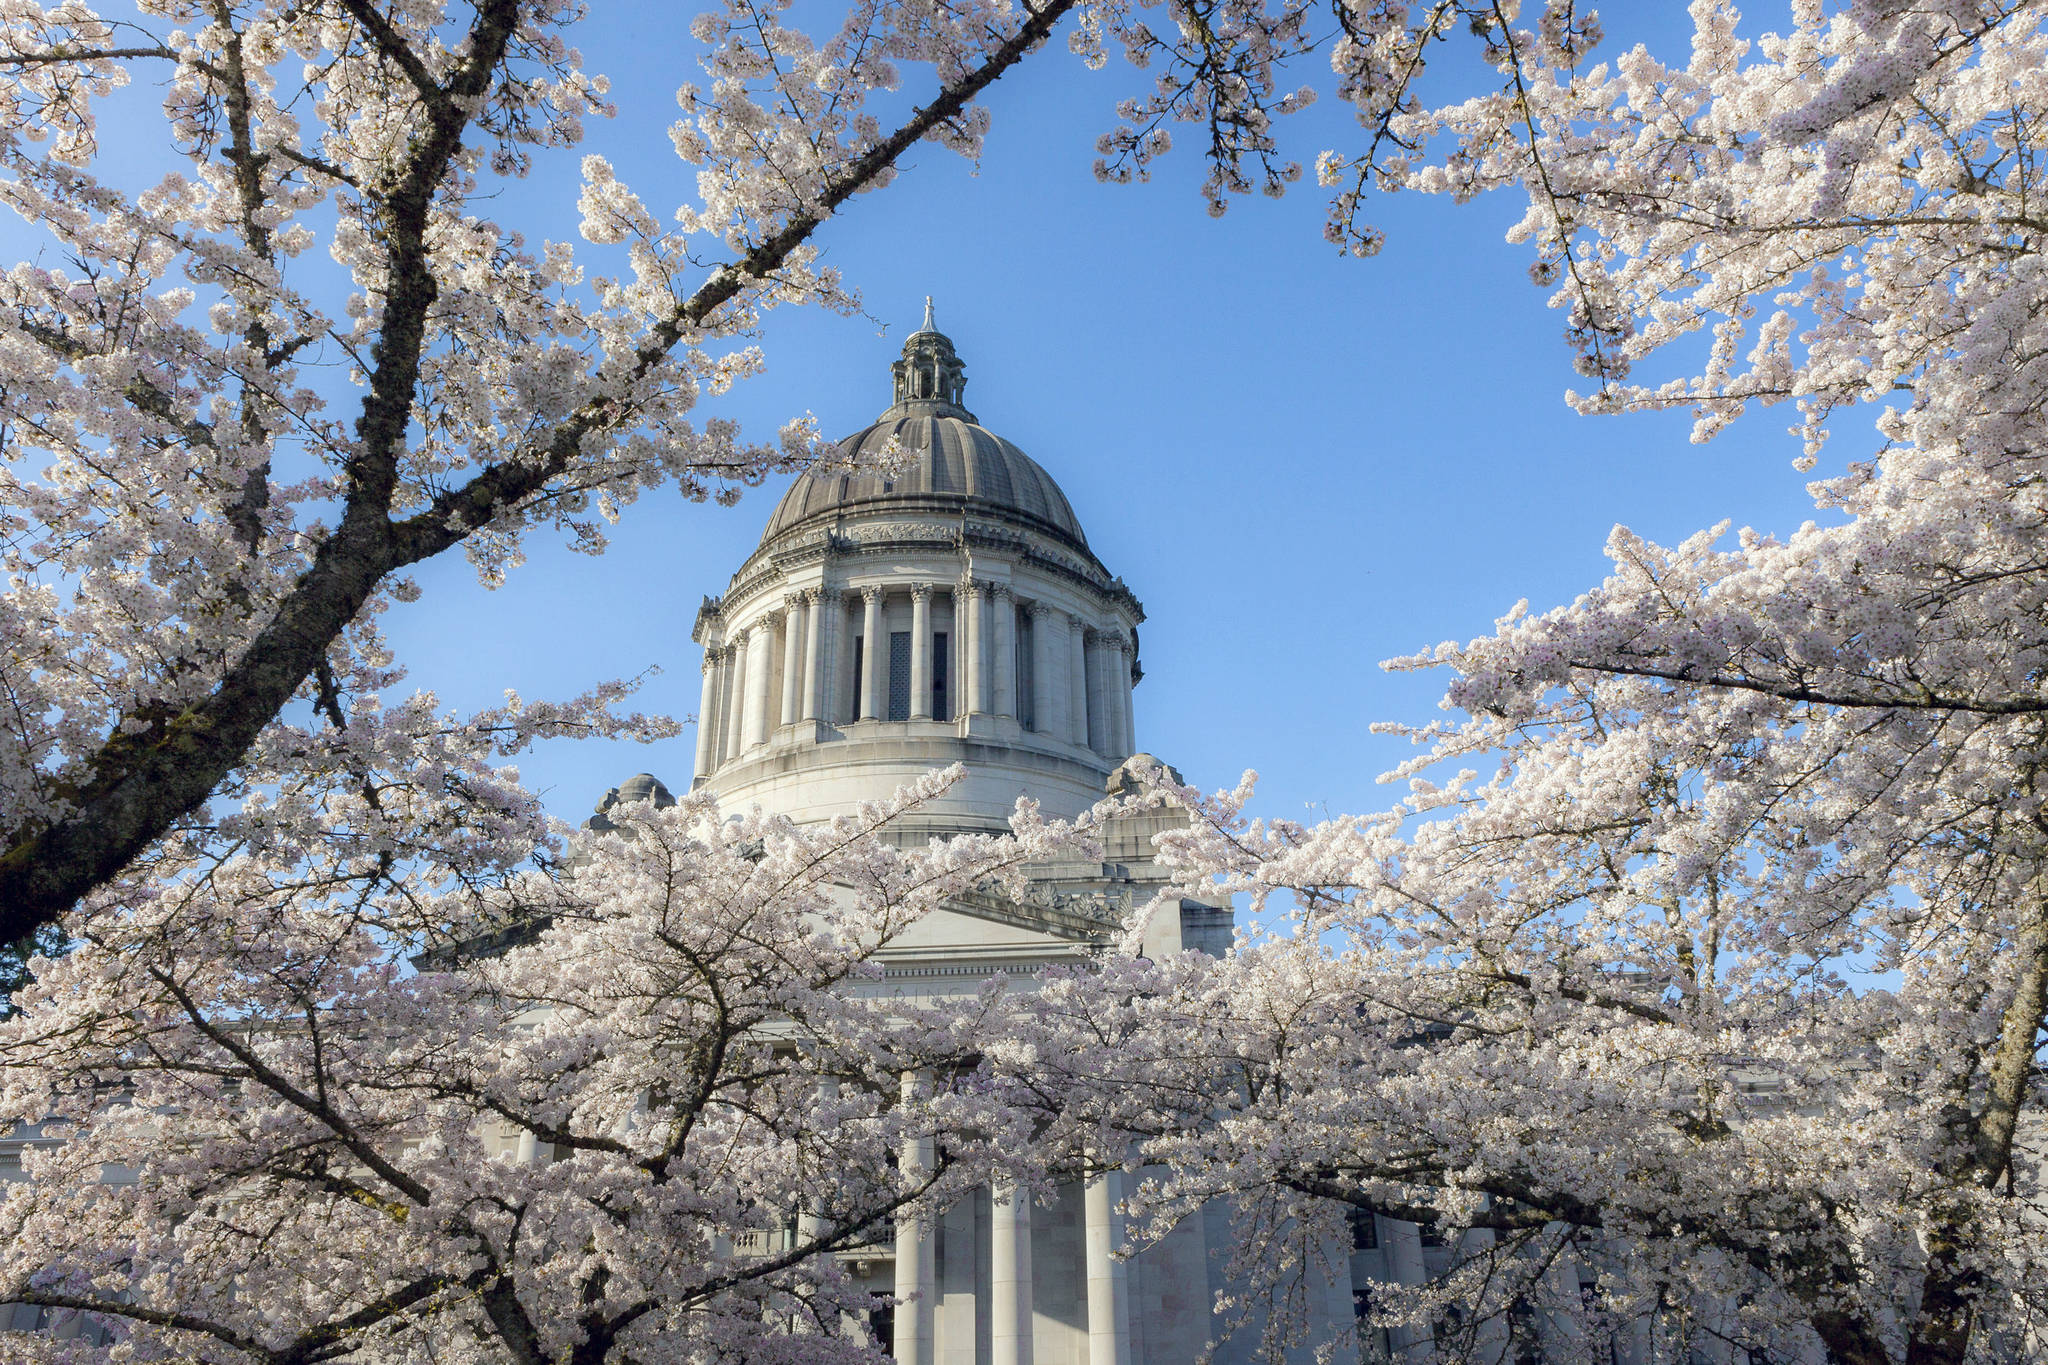 Cherry trees fully in bloom at the State Capitol Building in Olympia. Photo by Linda J. Smith